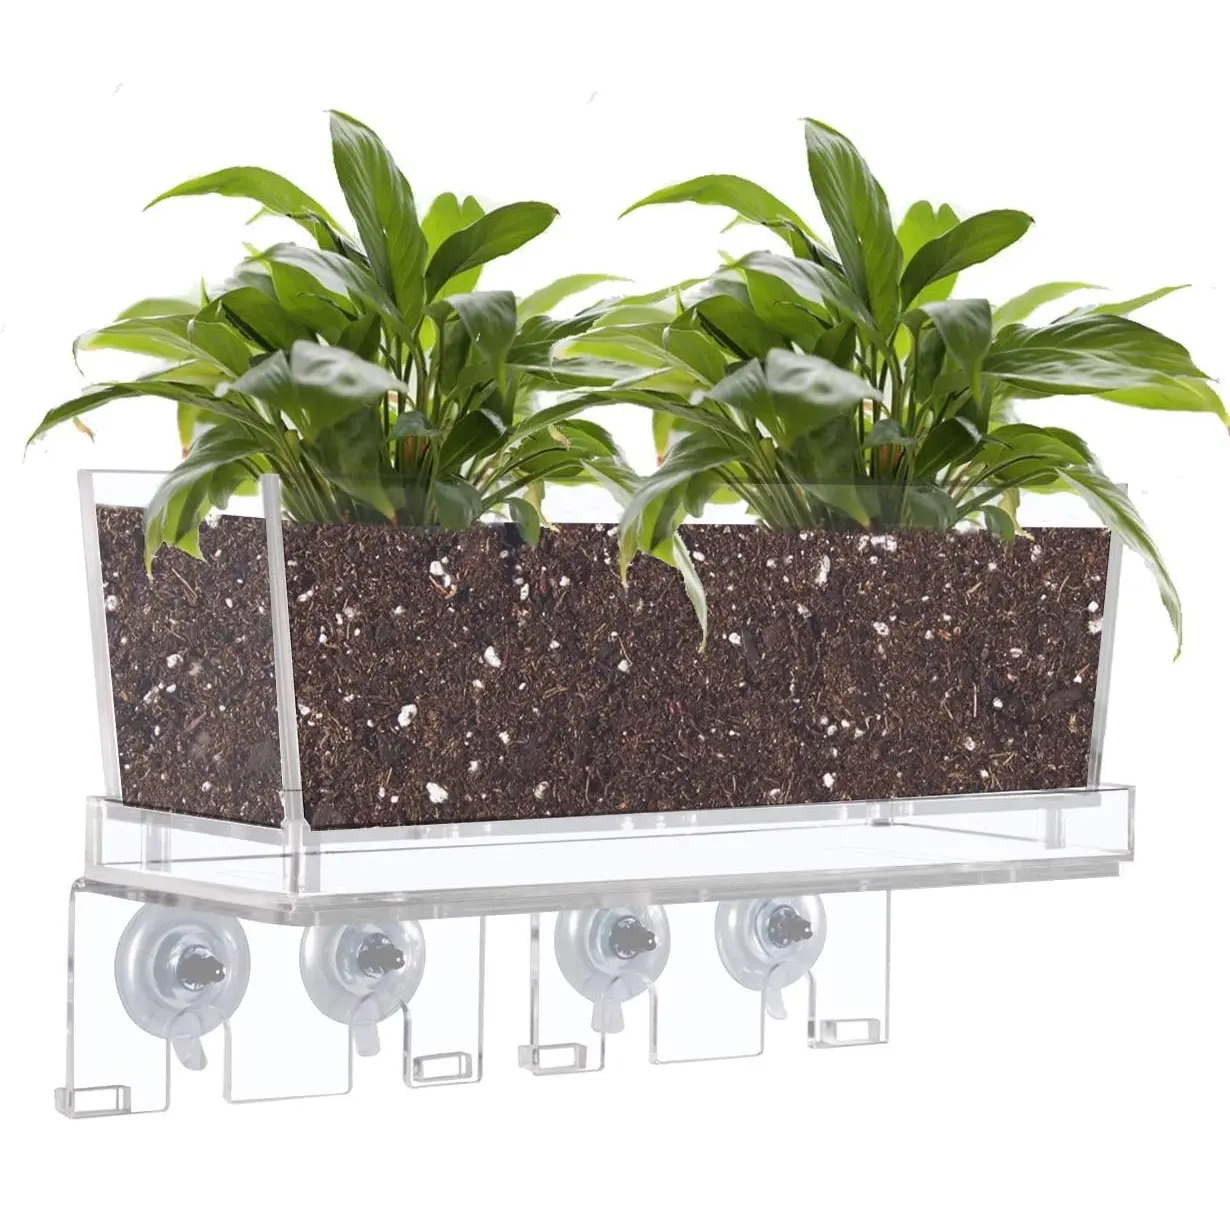 Acrylic Window Plant Box with Drain Tray And 4 Suction Cup Detachable Combination for Indoor Outdoor Home Garden Kitchen Planter